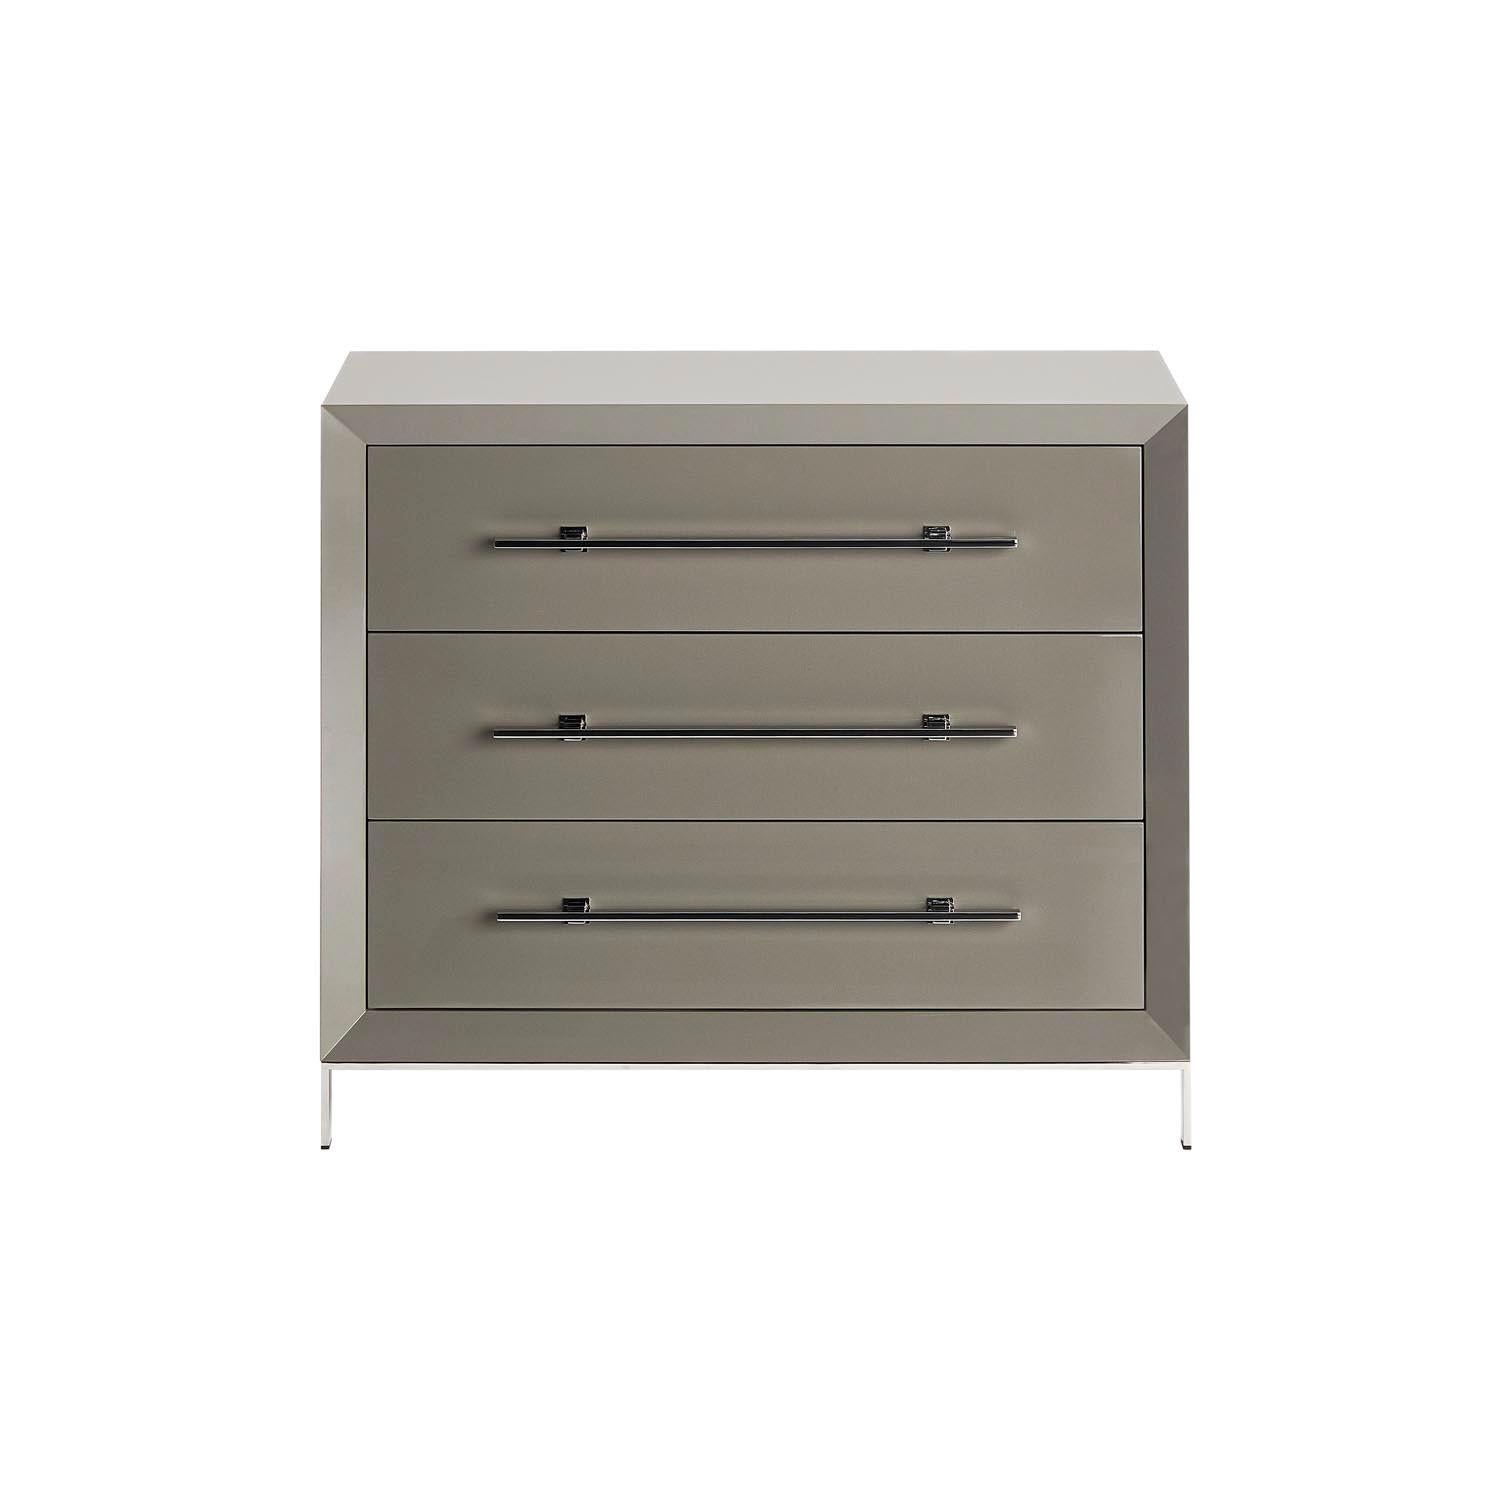 Magna is a classic style chest of drawers with three drawers to simplify storage and keeping the elegance of the bedroom.
Glossy lacquer structure in grey S6502-Y color, combined with polished stainless steel handles and feet.